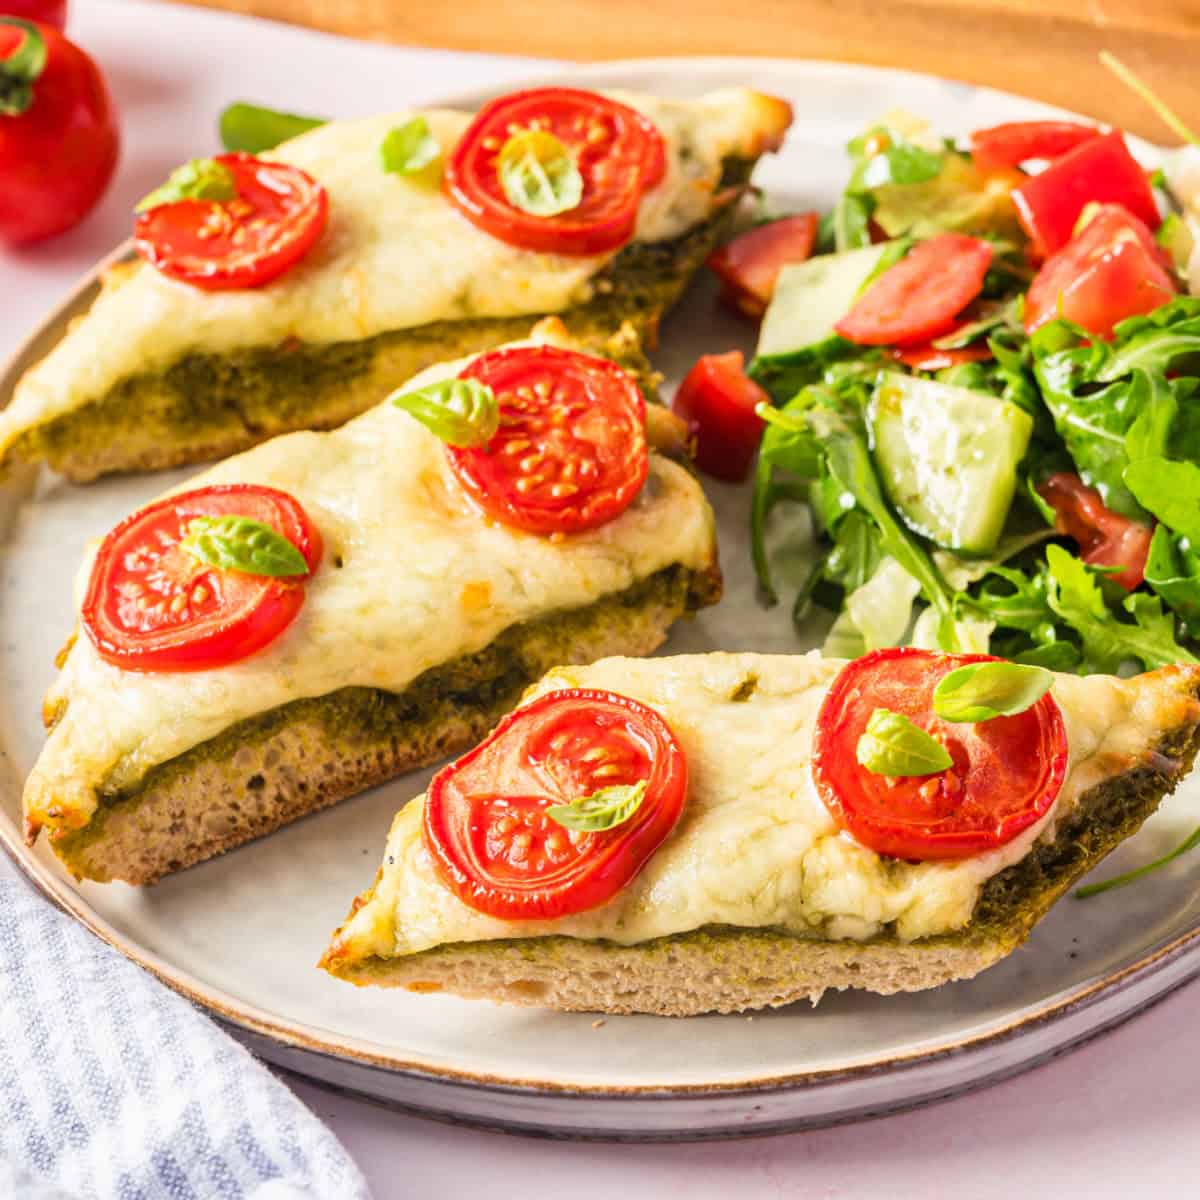 square imagePesto French Bread Pizza is a mouth-watering appetizer featuring a combination of warm bread, flavorful pesto, gooey cheese, and tomatoes!